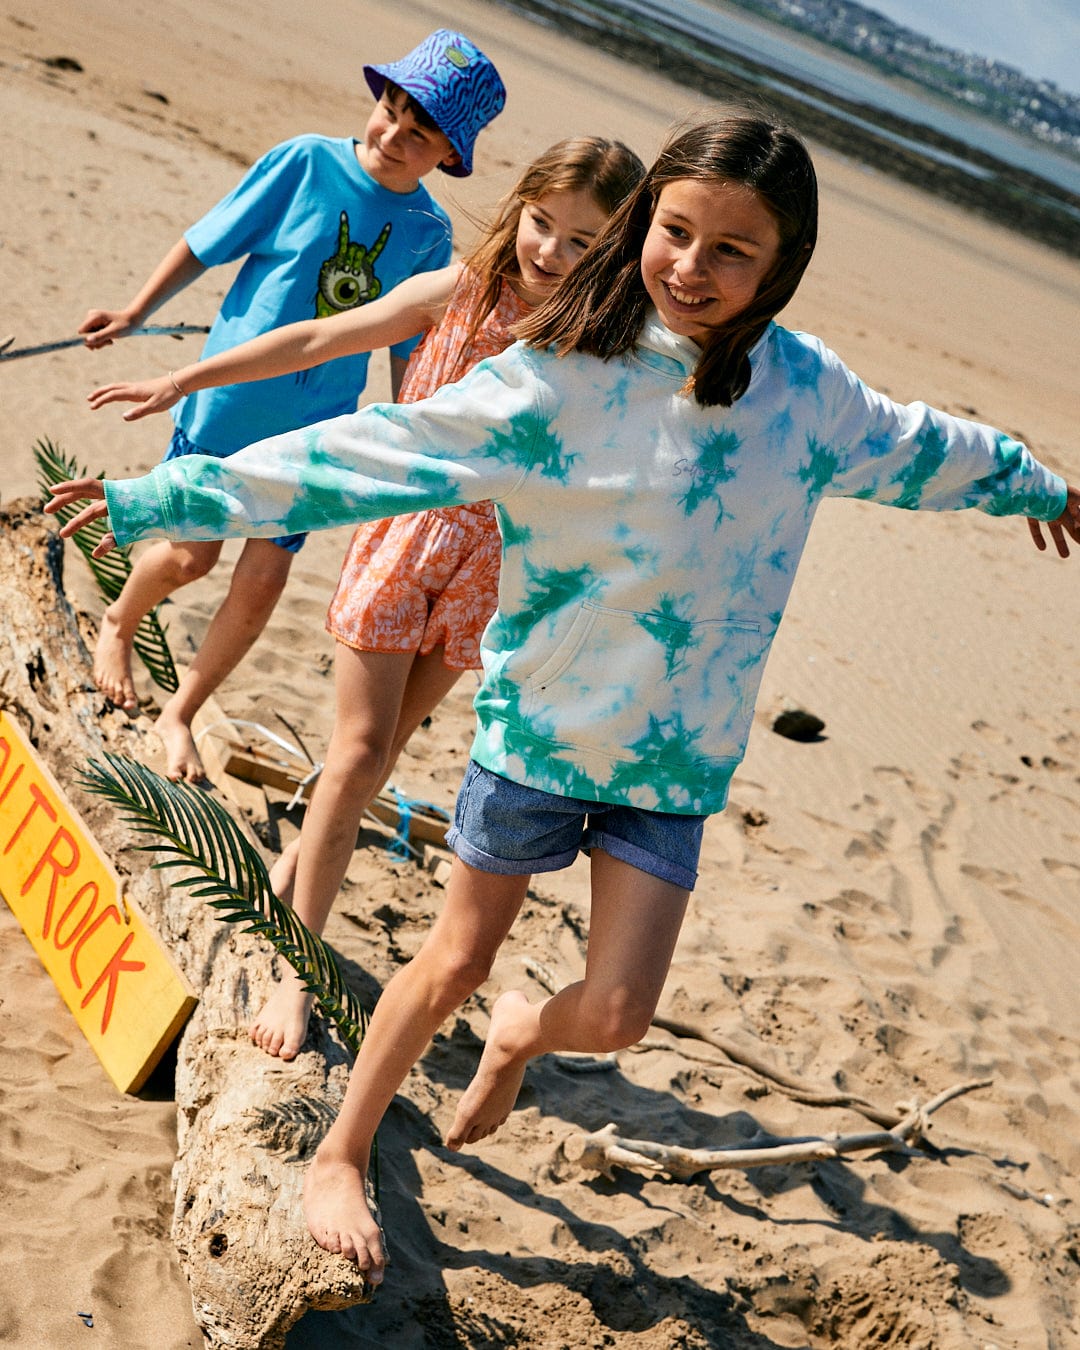 Three children balancing on a driftwood log on the beach. One wears a Mermaid Surf - Kids Tie Dye Pop Hoodie - Turquoise/White with Saltrock branding, another an orange dress, and the third a blue T-shirt and hat. A yellow sign partially visible reads "ROCK.